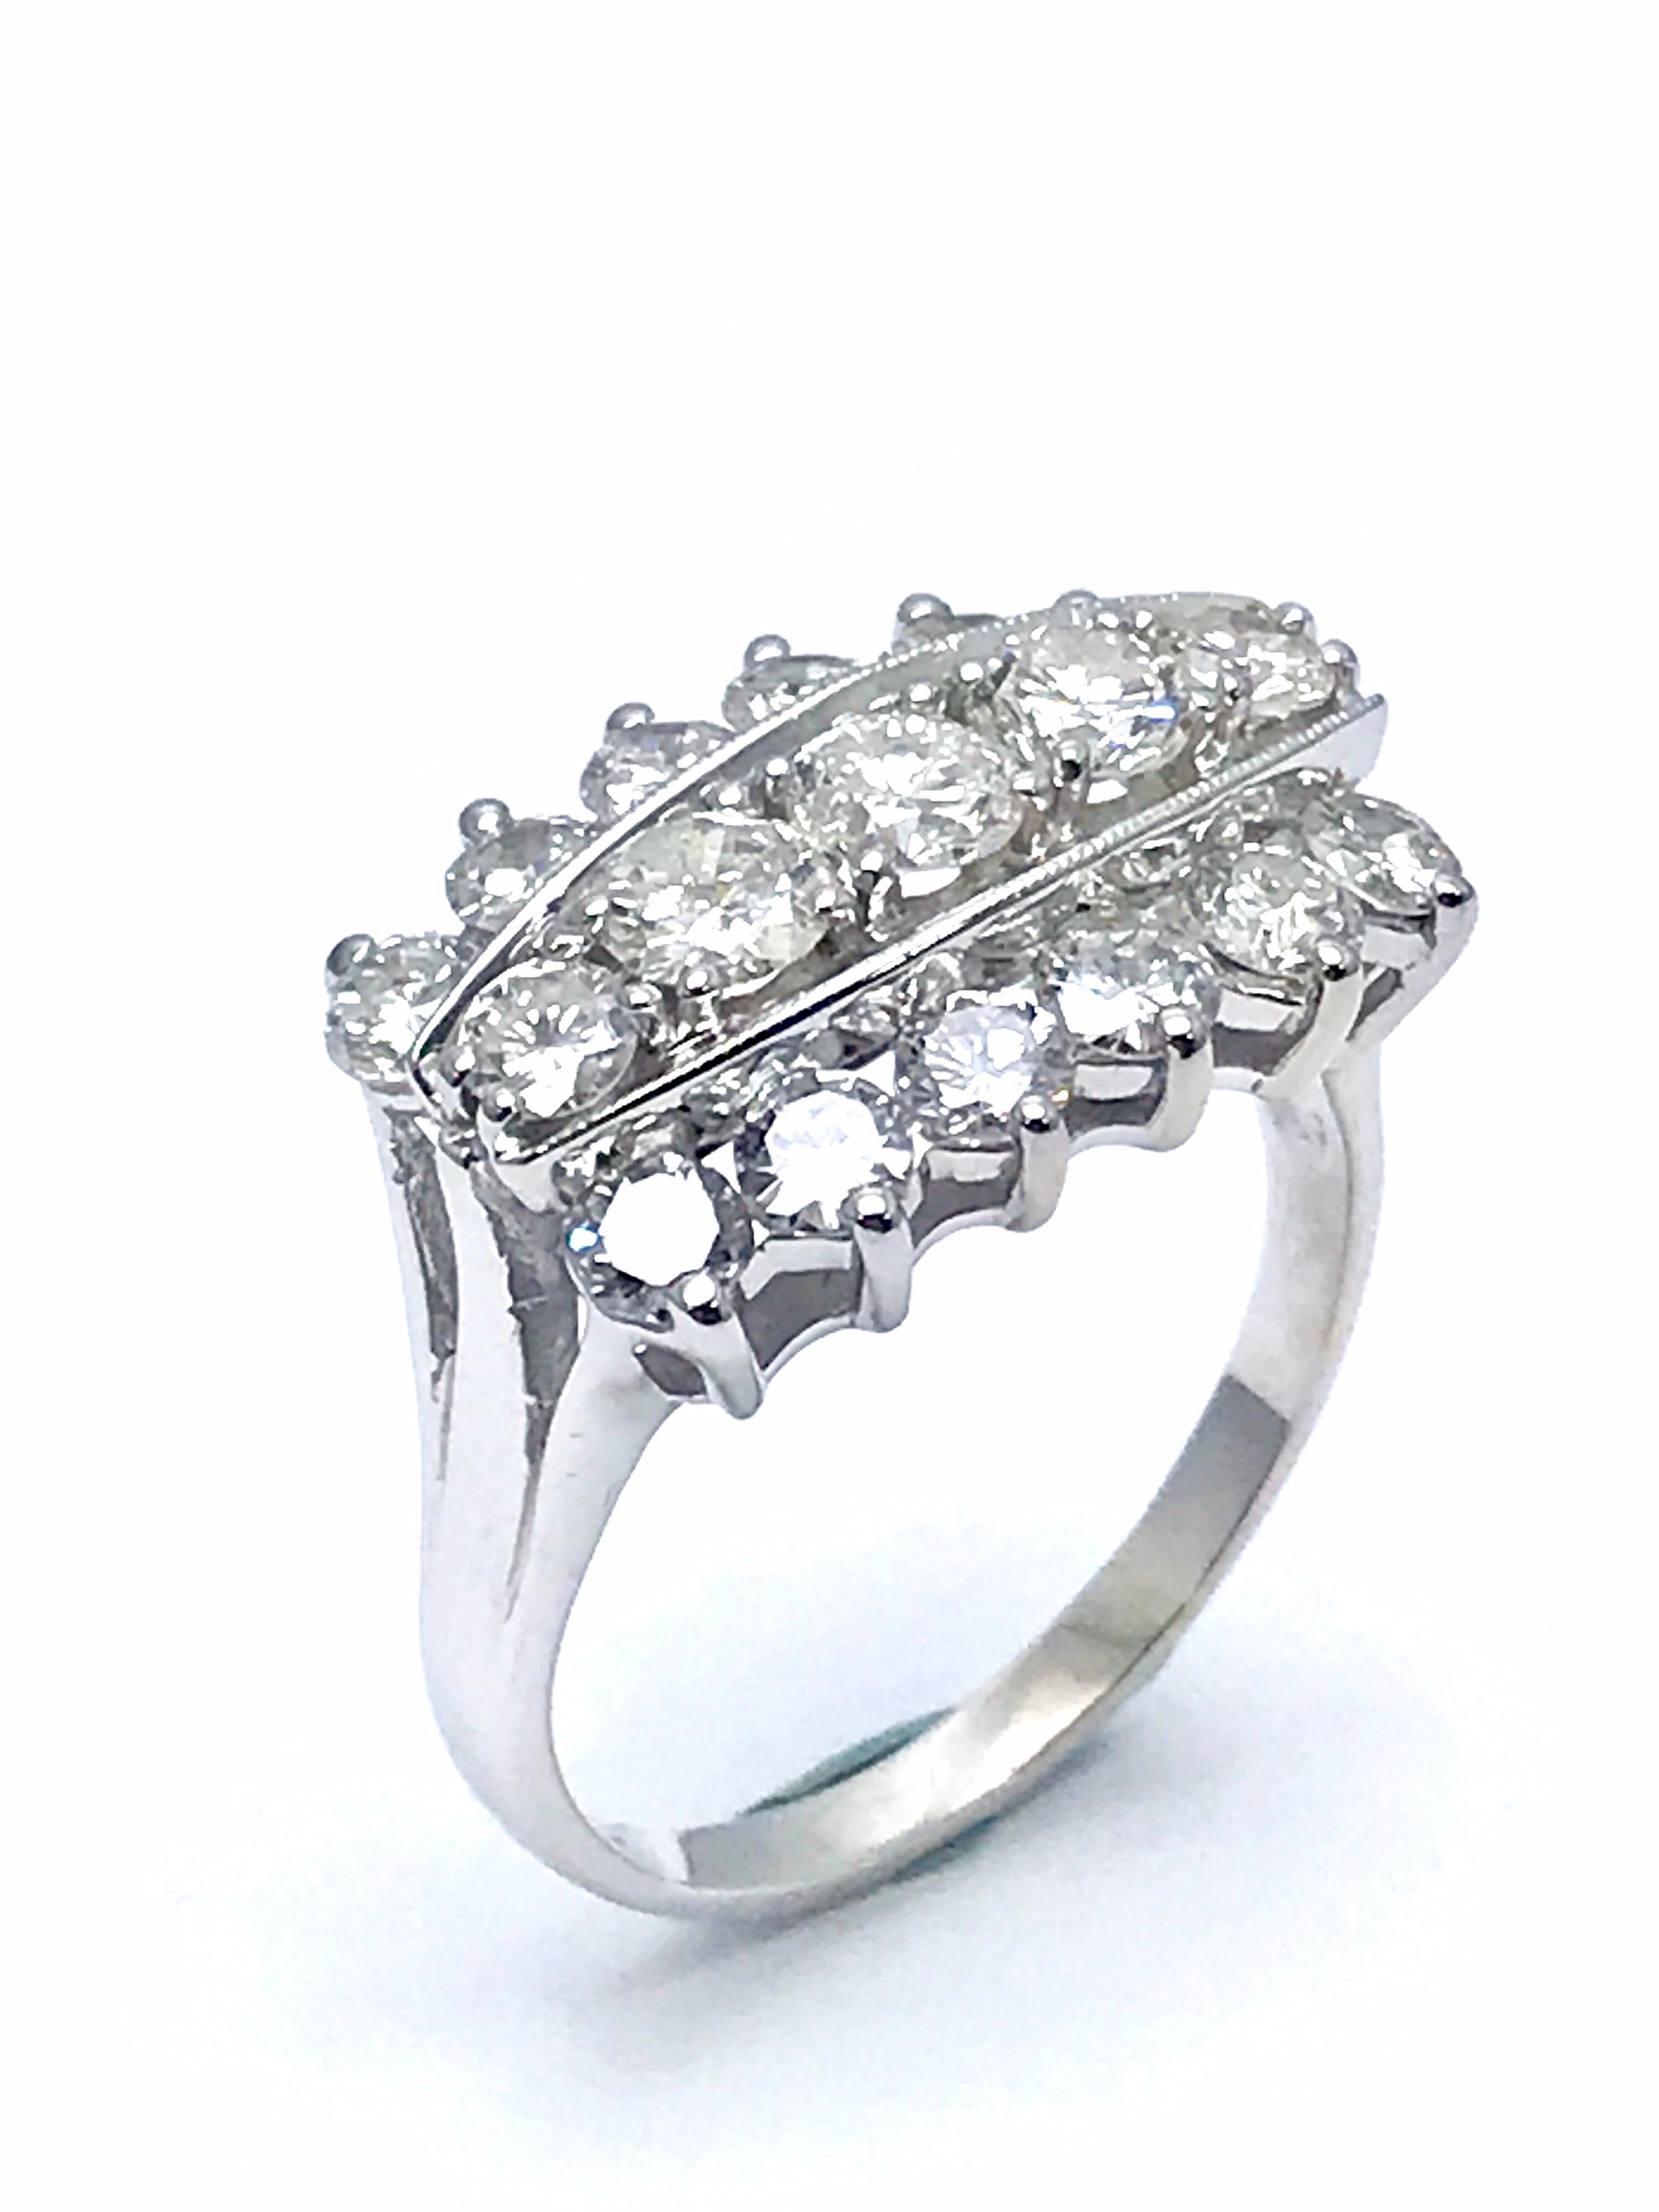 A fiery 2.00 carat total weight three row round brilliant Diamond right hand ring in 14 karat white gold.  The diamonds are all prong set, and slightly graduated toward the center.  They are graded as H color, VS2-SI1 clarity.  The ring is currently